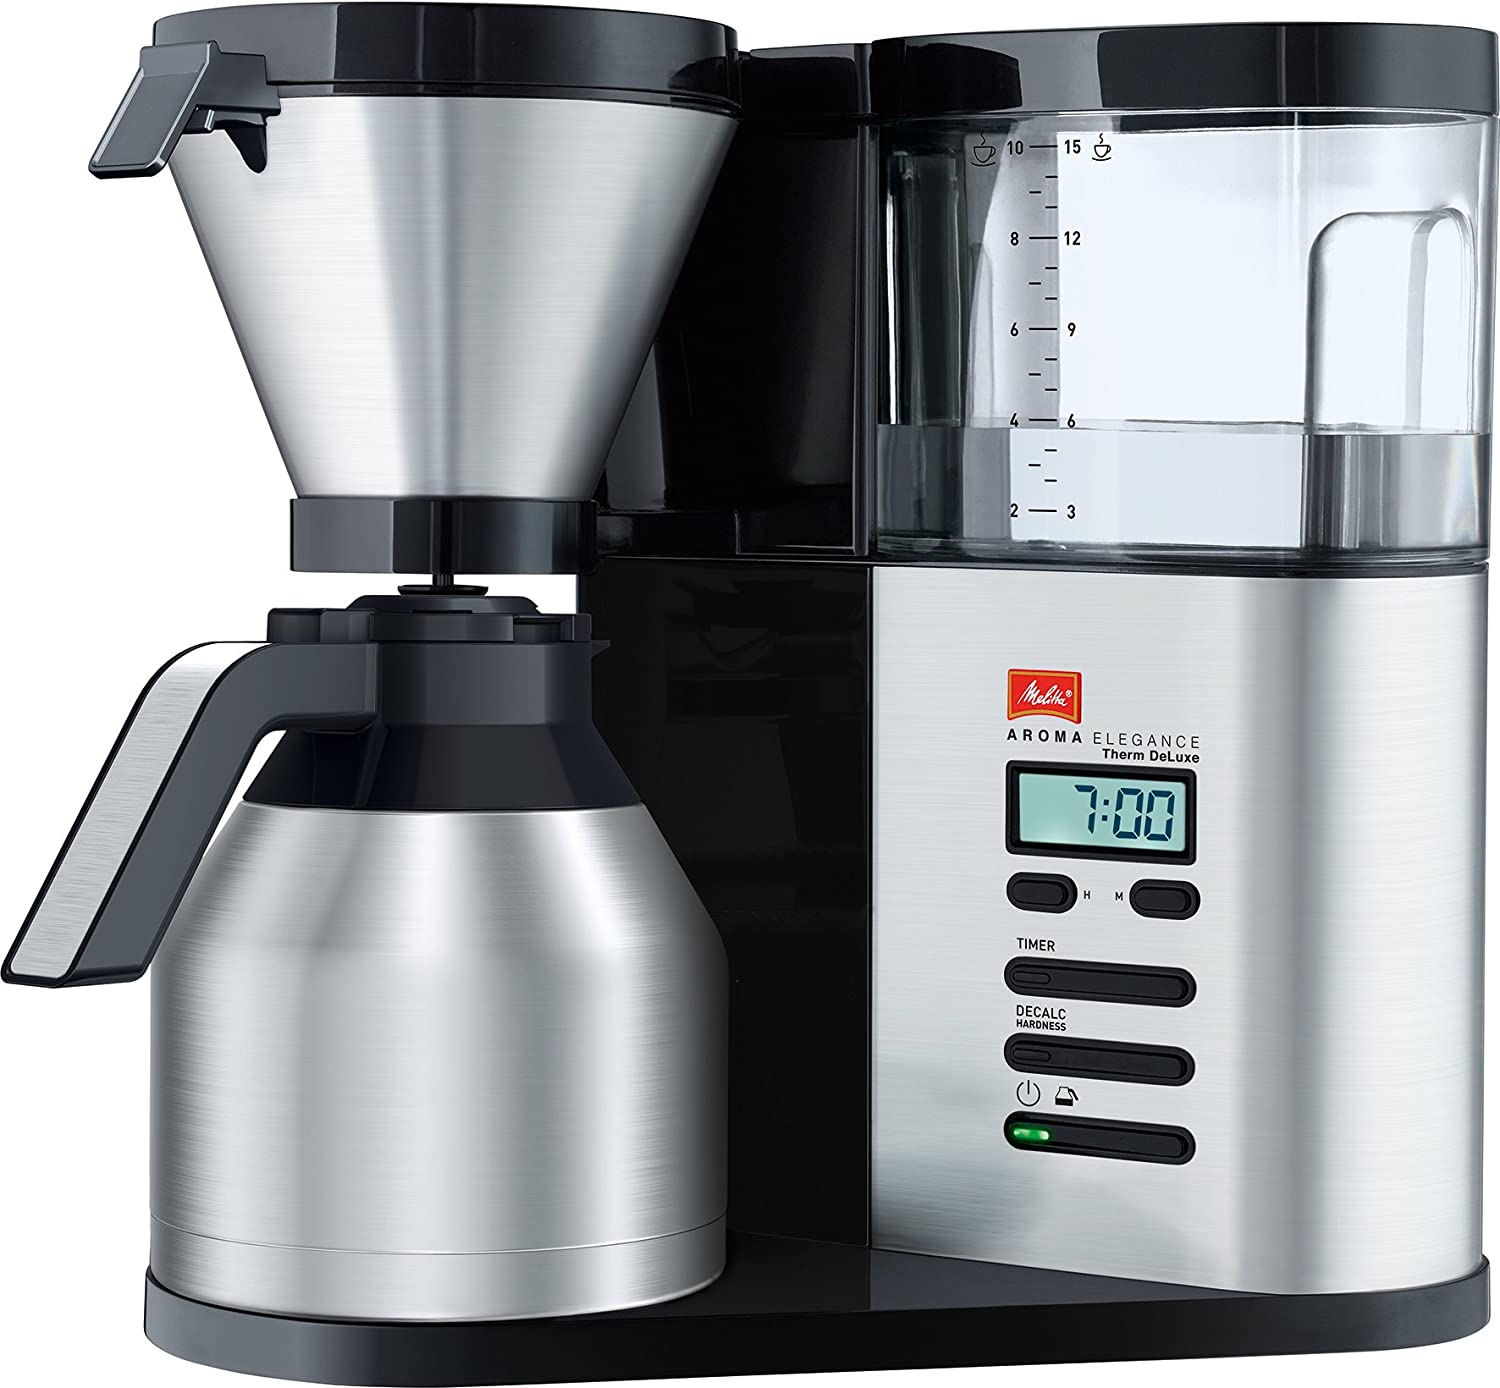 Melitta 1012-06 AromaElegance Therm DeLuxe filter coffee machine, black / stainless steel